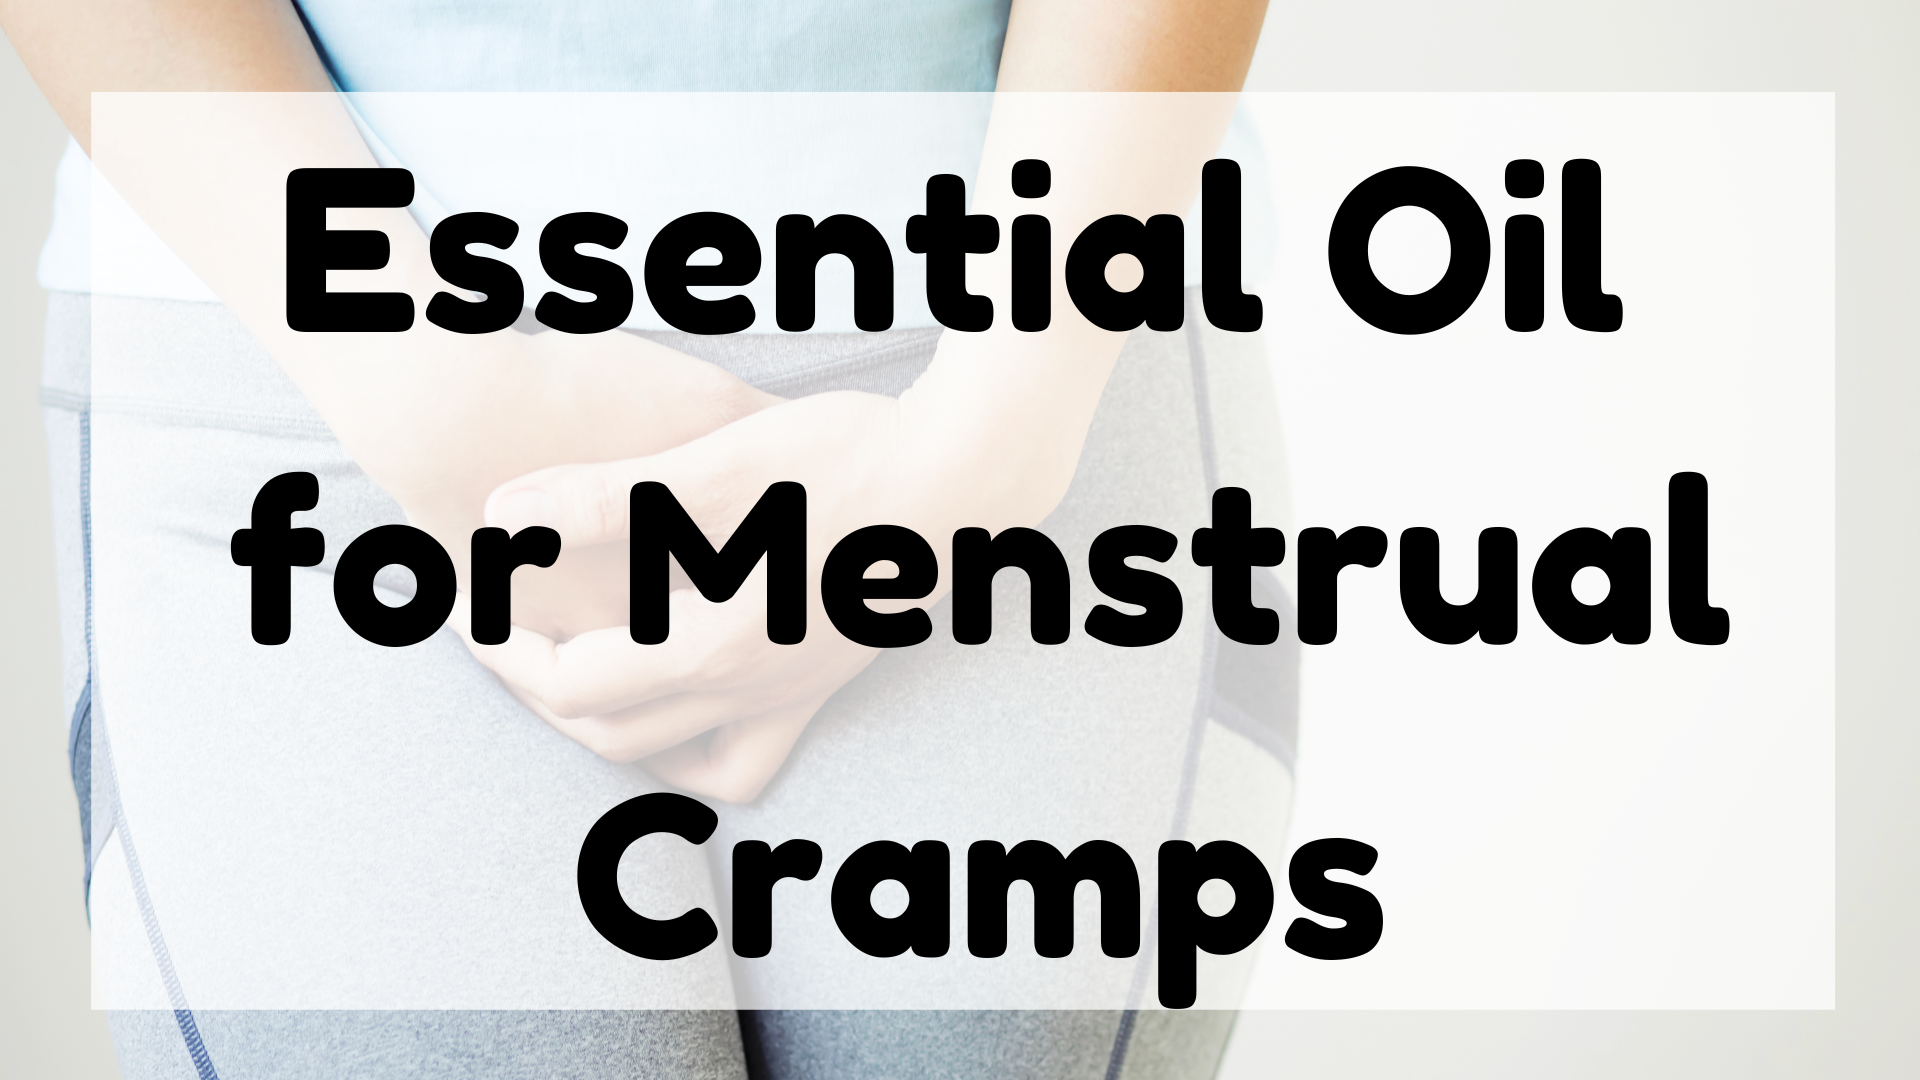  Essential Oil for Menstral Cramps featured image